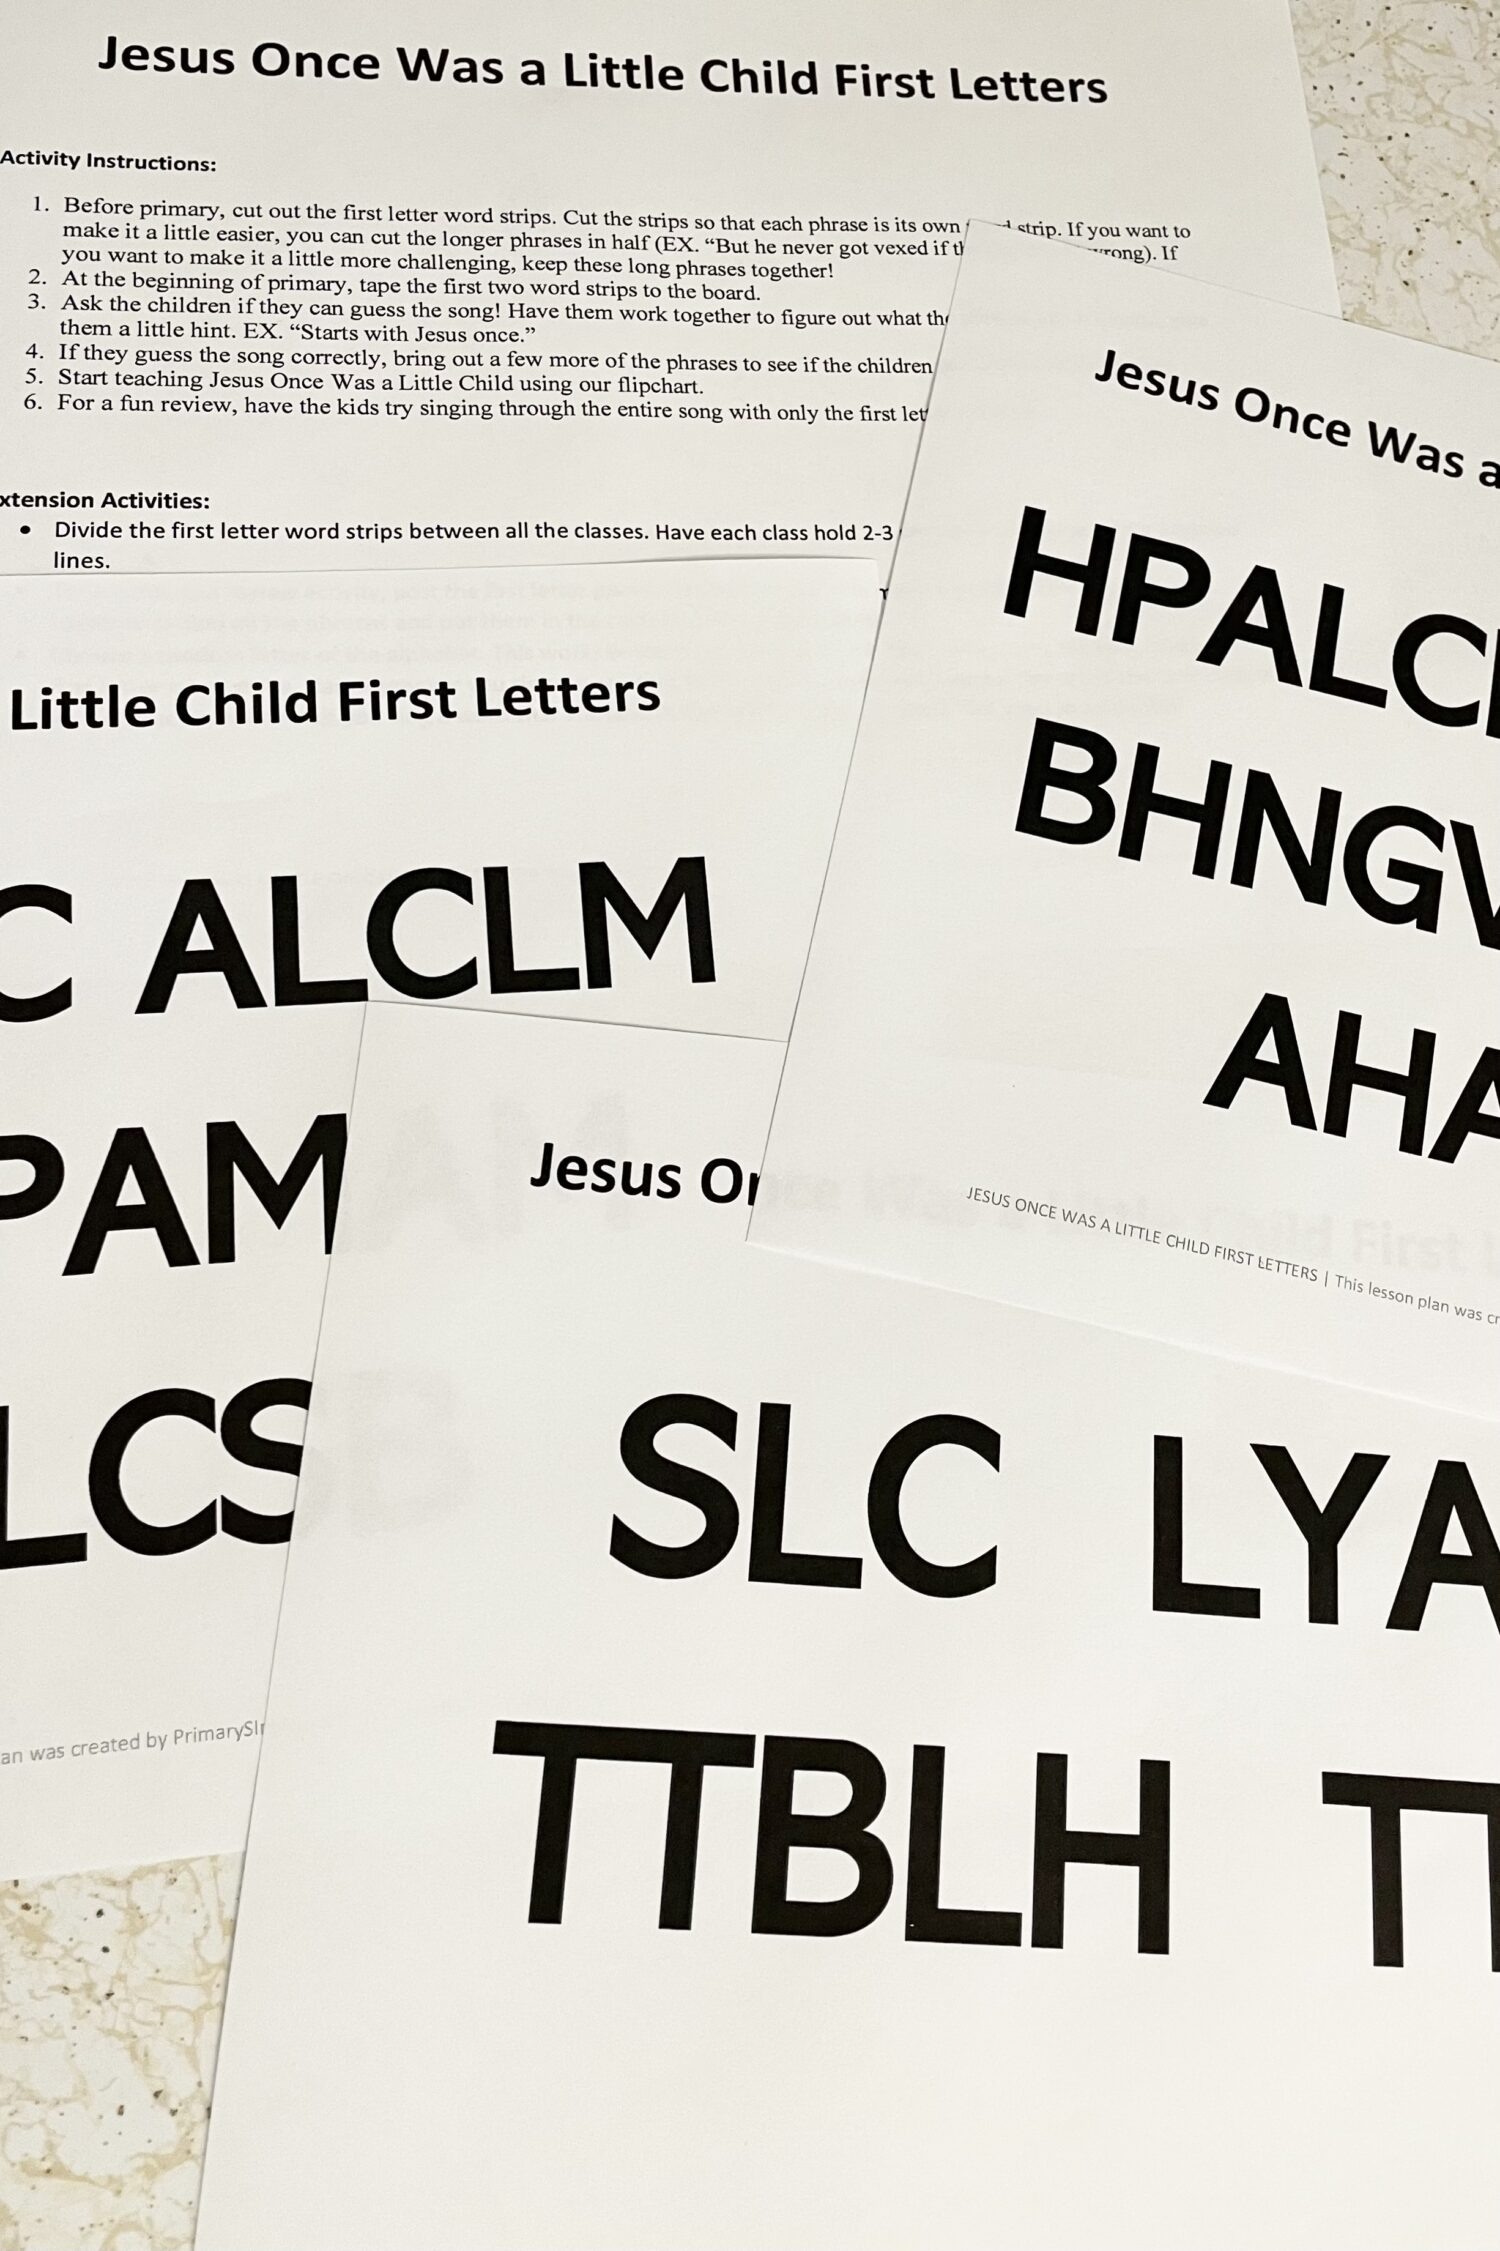 Teach the LDS Primary song Keep the Commandments with this fun First Letters lesson plan / activity idea! Perfect for Singing Time music leaders or for home Come, Follow Me! #LDS #Primary #SingingTime #ComeFollowMe